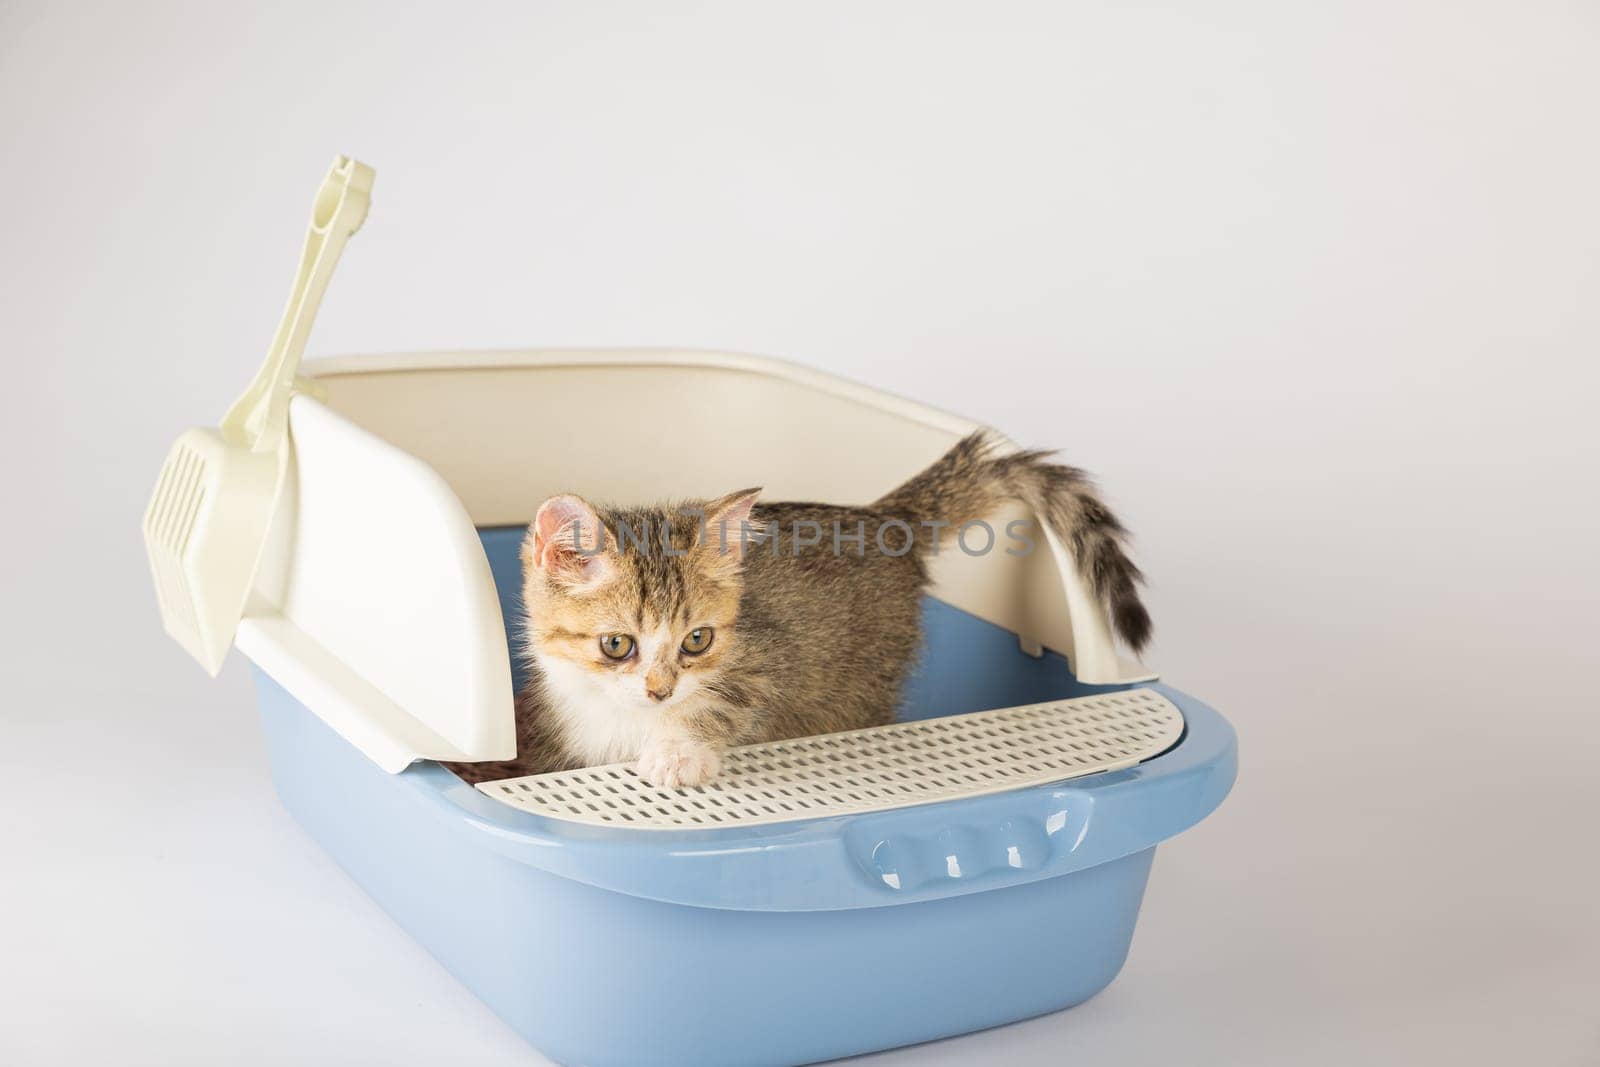 An isolated cat seated in plastic litter toilet box or sandbox set against clean white backdrop. This educational image underscores feline hygiene and care presenting clean well-maintained environment by Sorapop